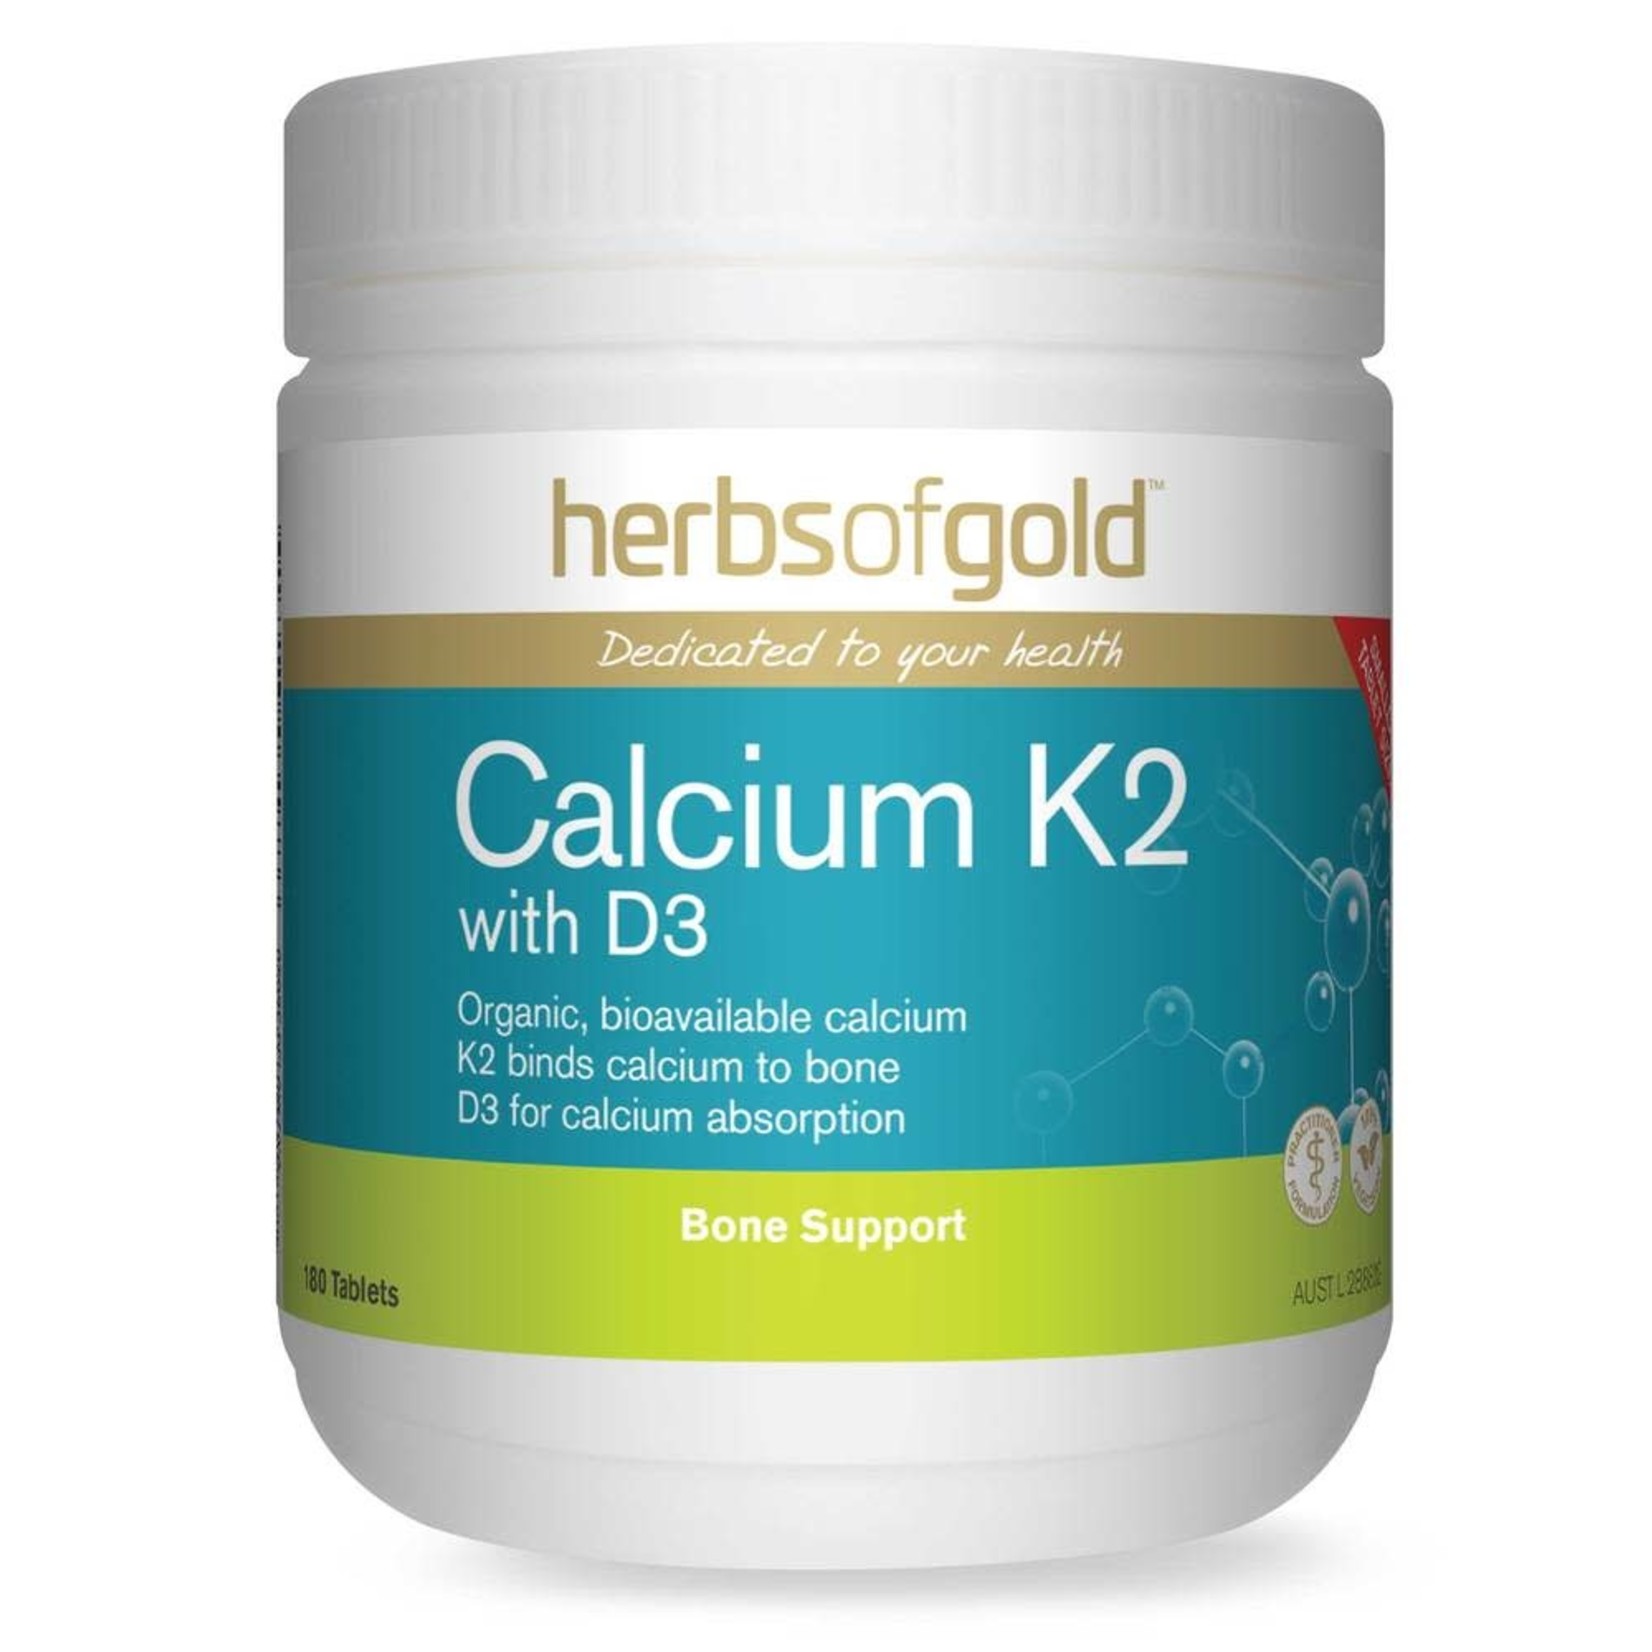 herbs of old Herbs of gold Calcium K2 with D3